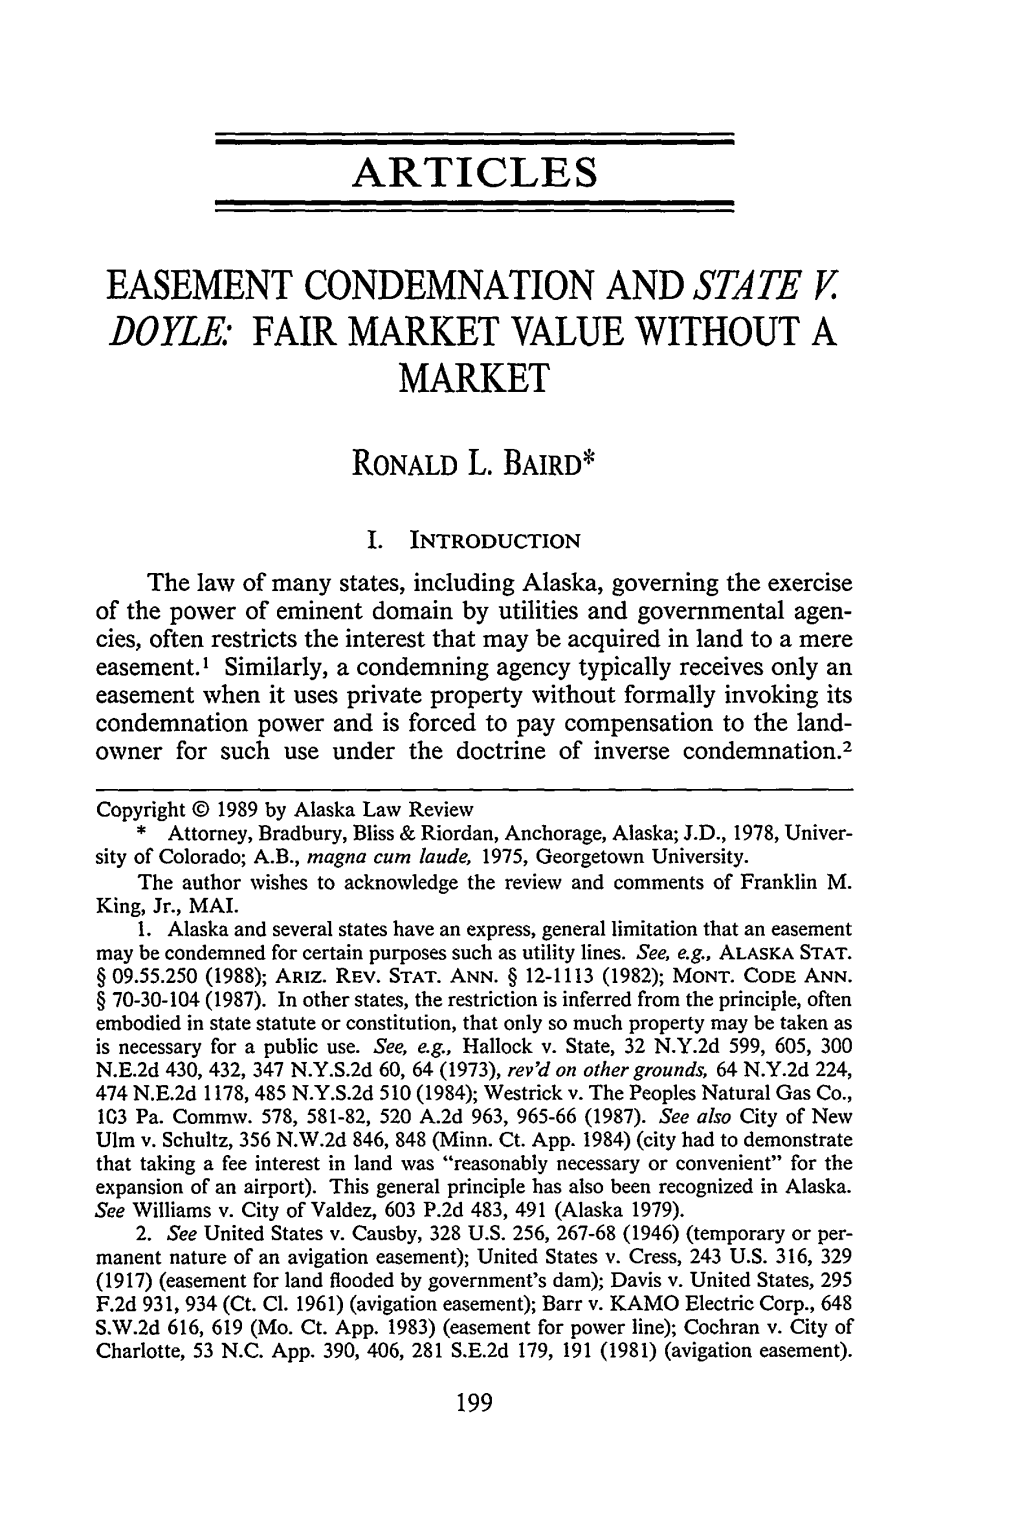 Easement Condemnation and State V. Doyle